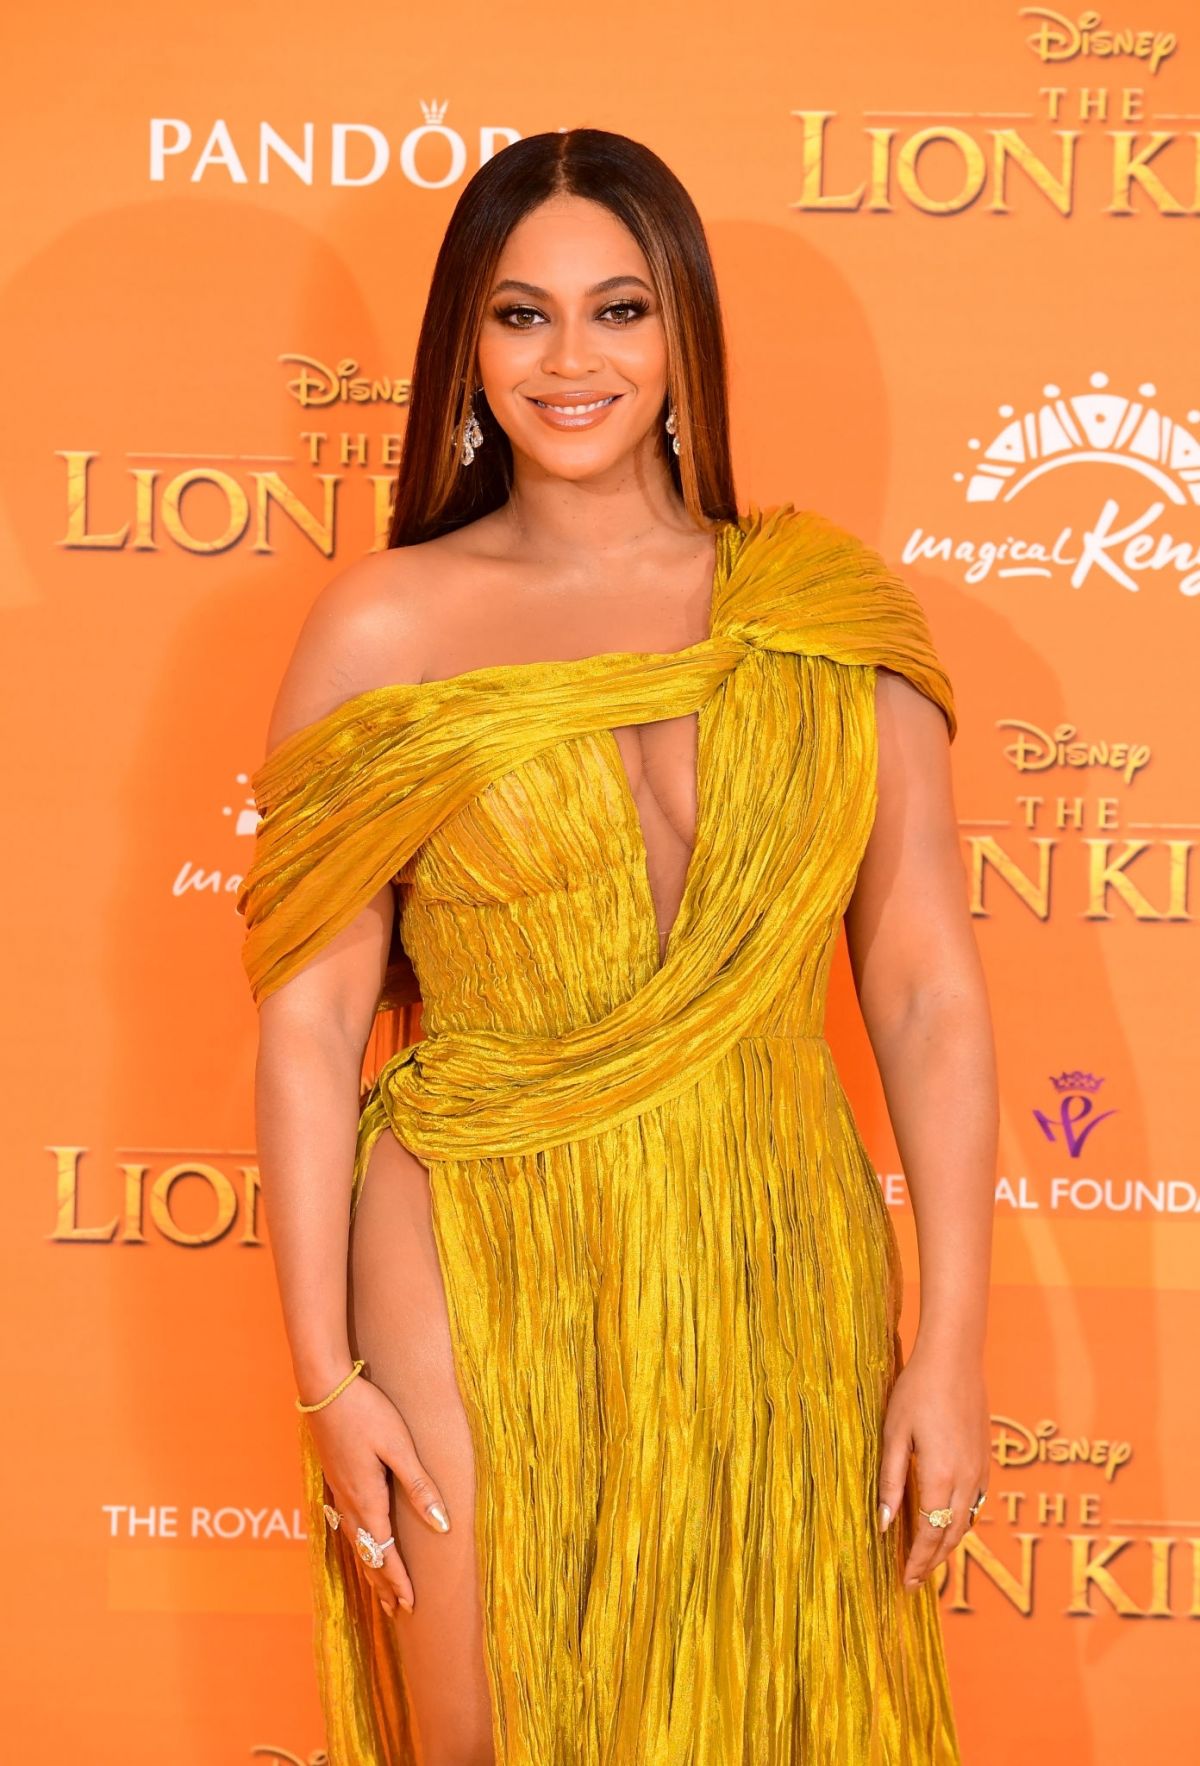 beyonce-at-the-lion-king-premiere-in-london-07-14-2019-10.jpg